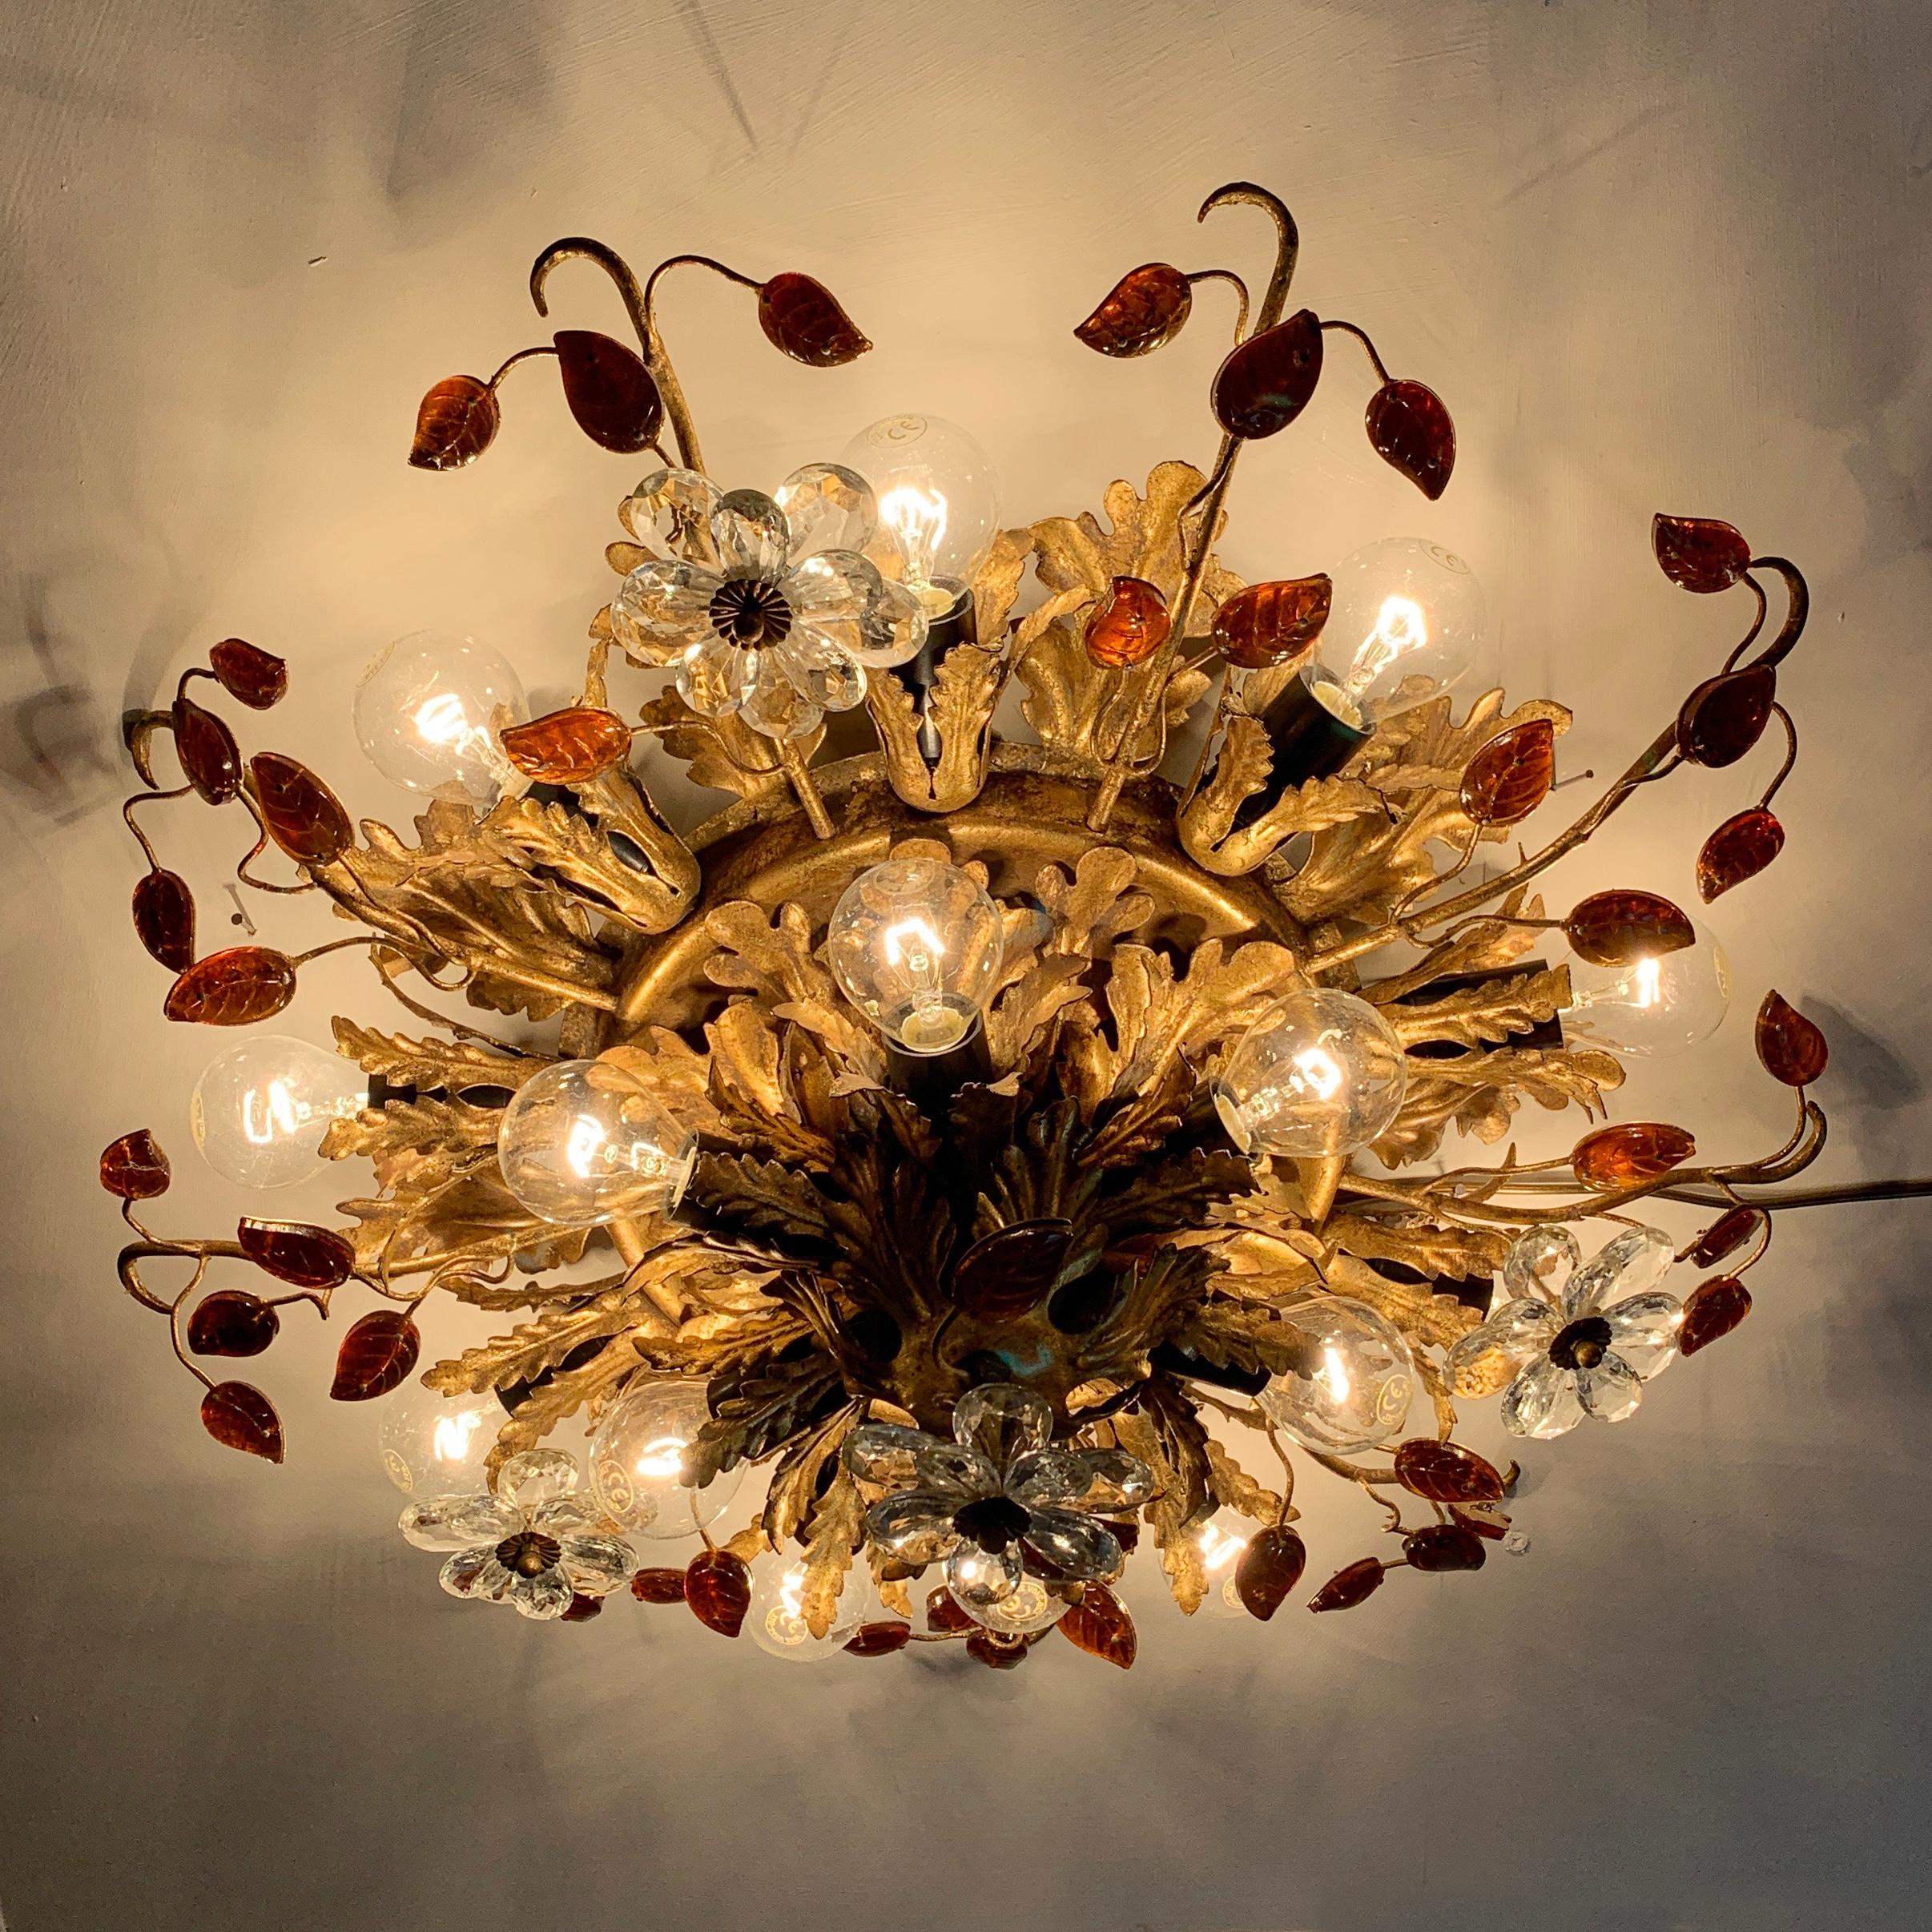 Italian florentine flushmount ceiling light
Banci Firenze, Italy, circa 1960s
Double layered, top layer featuring 6 bulb holders, lower layer 9 bulb holders
Stunning gilt acanthus leaf design with clear Murano glass flowers and amber Murano glass